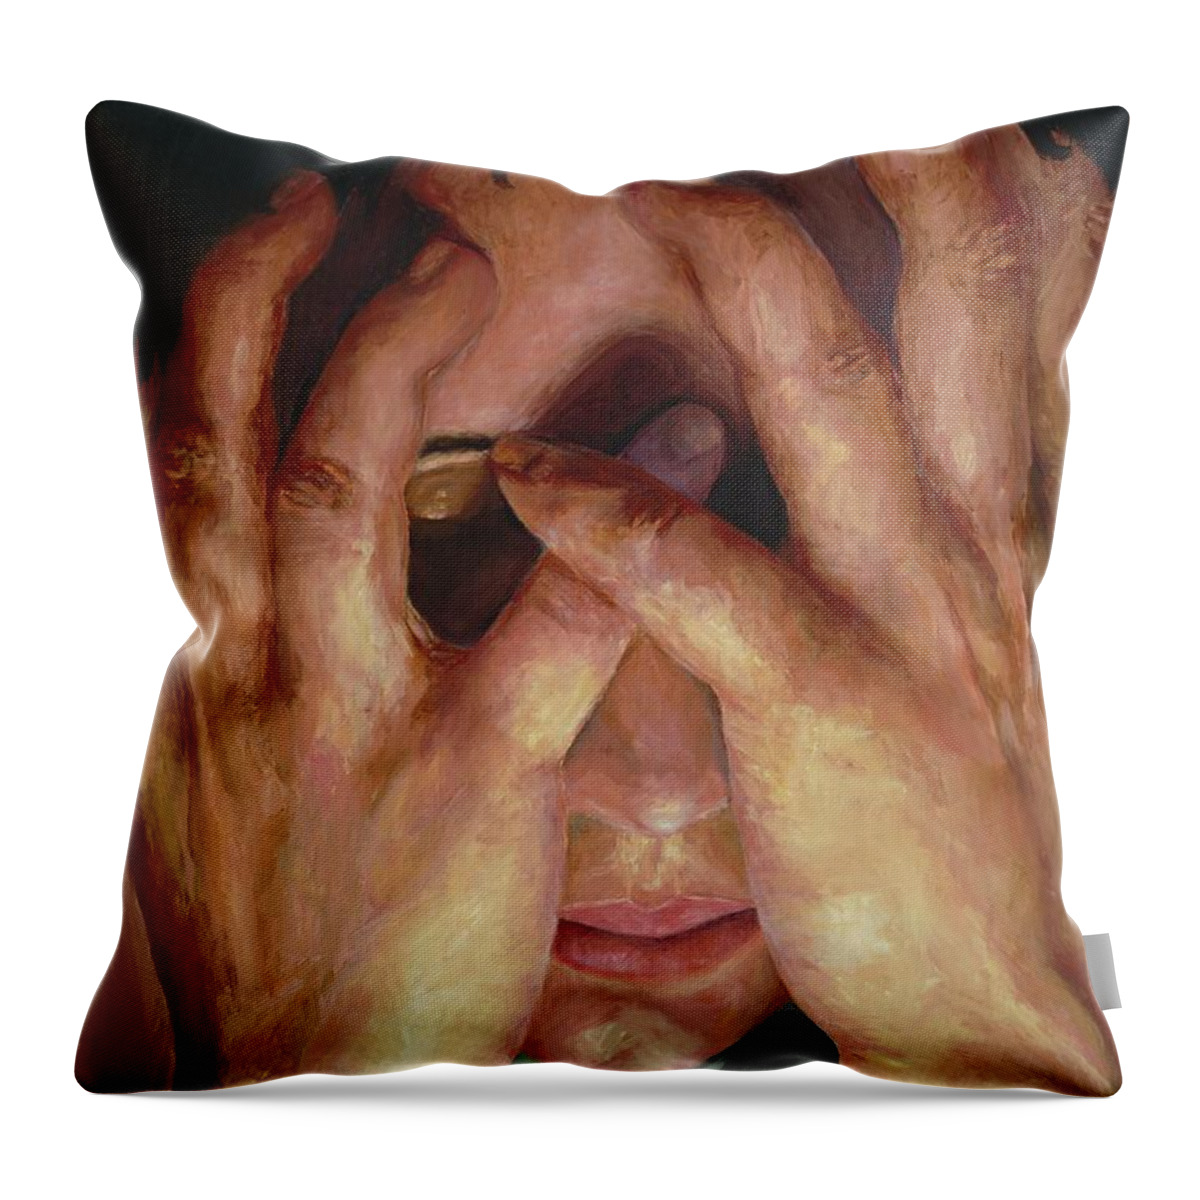 Hands Throw Pillow featuring the painting Feelings by Patricia Awapara